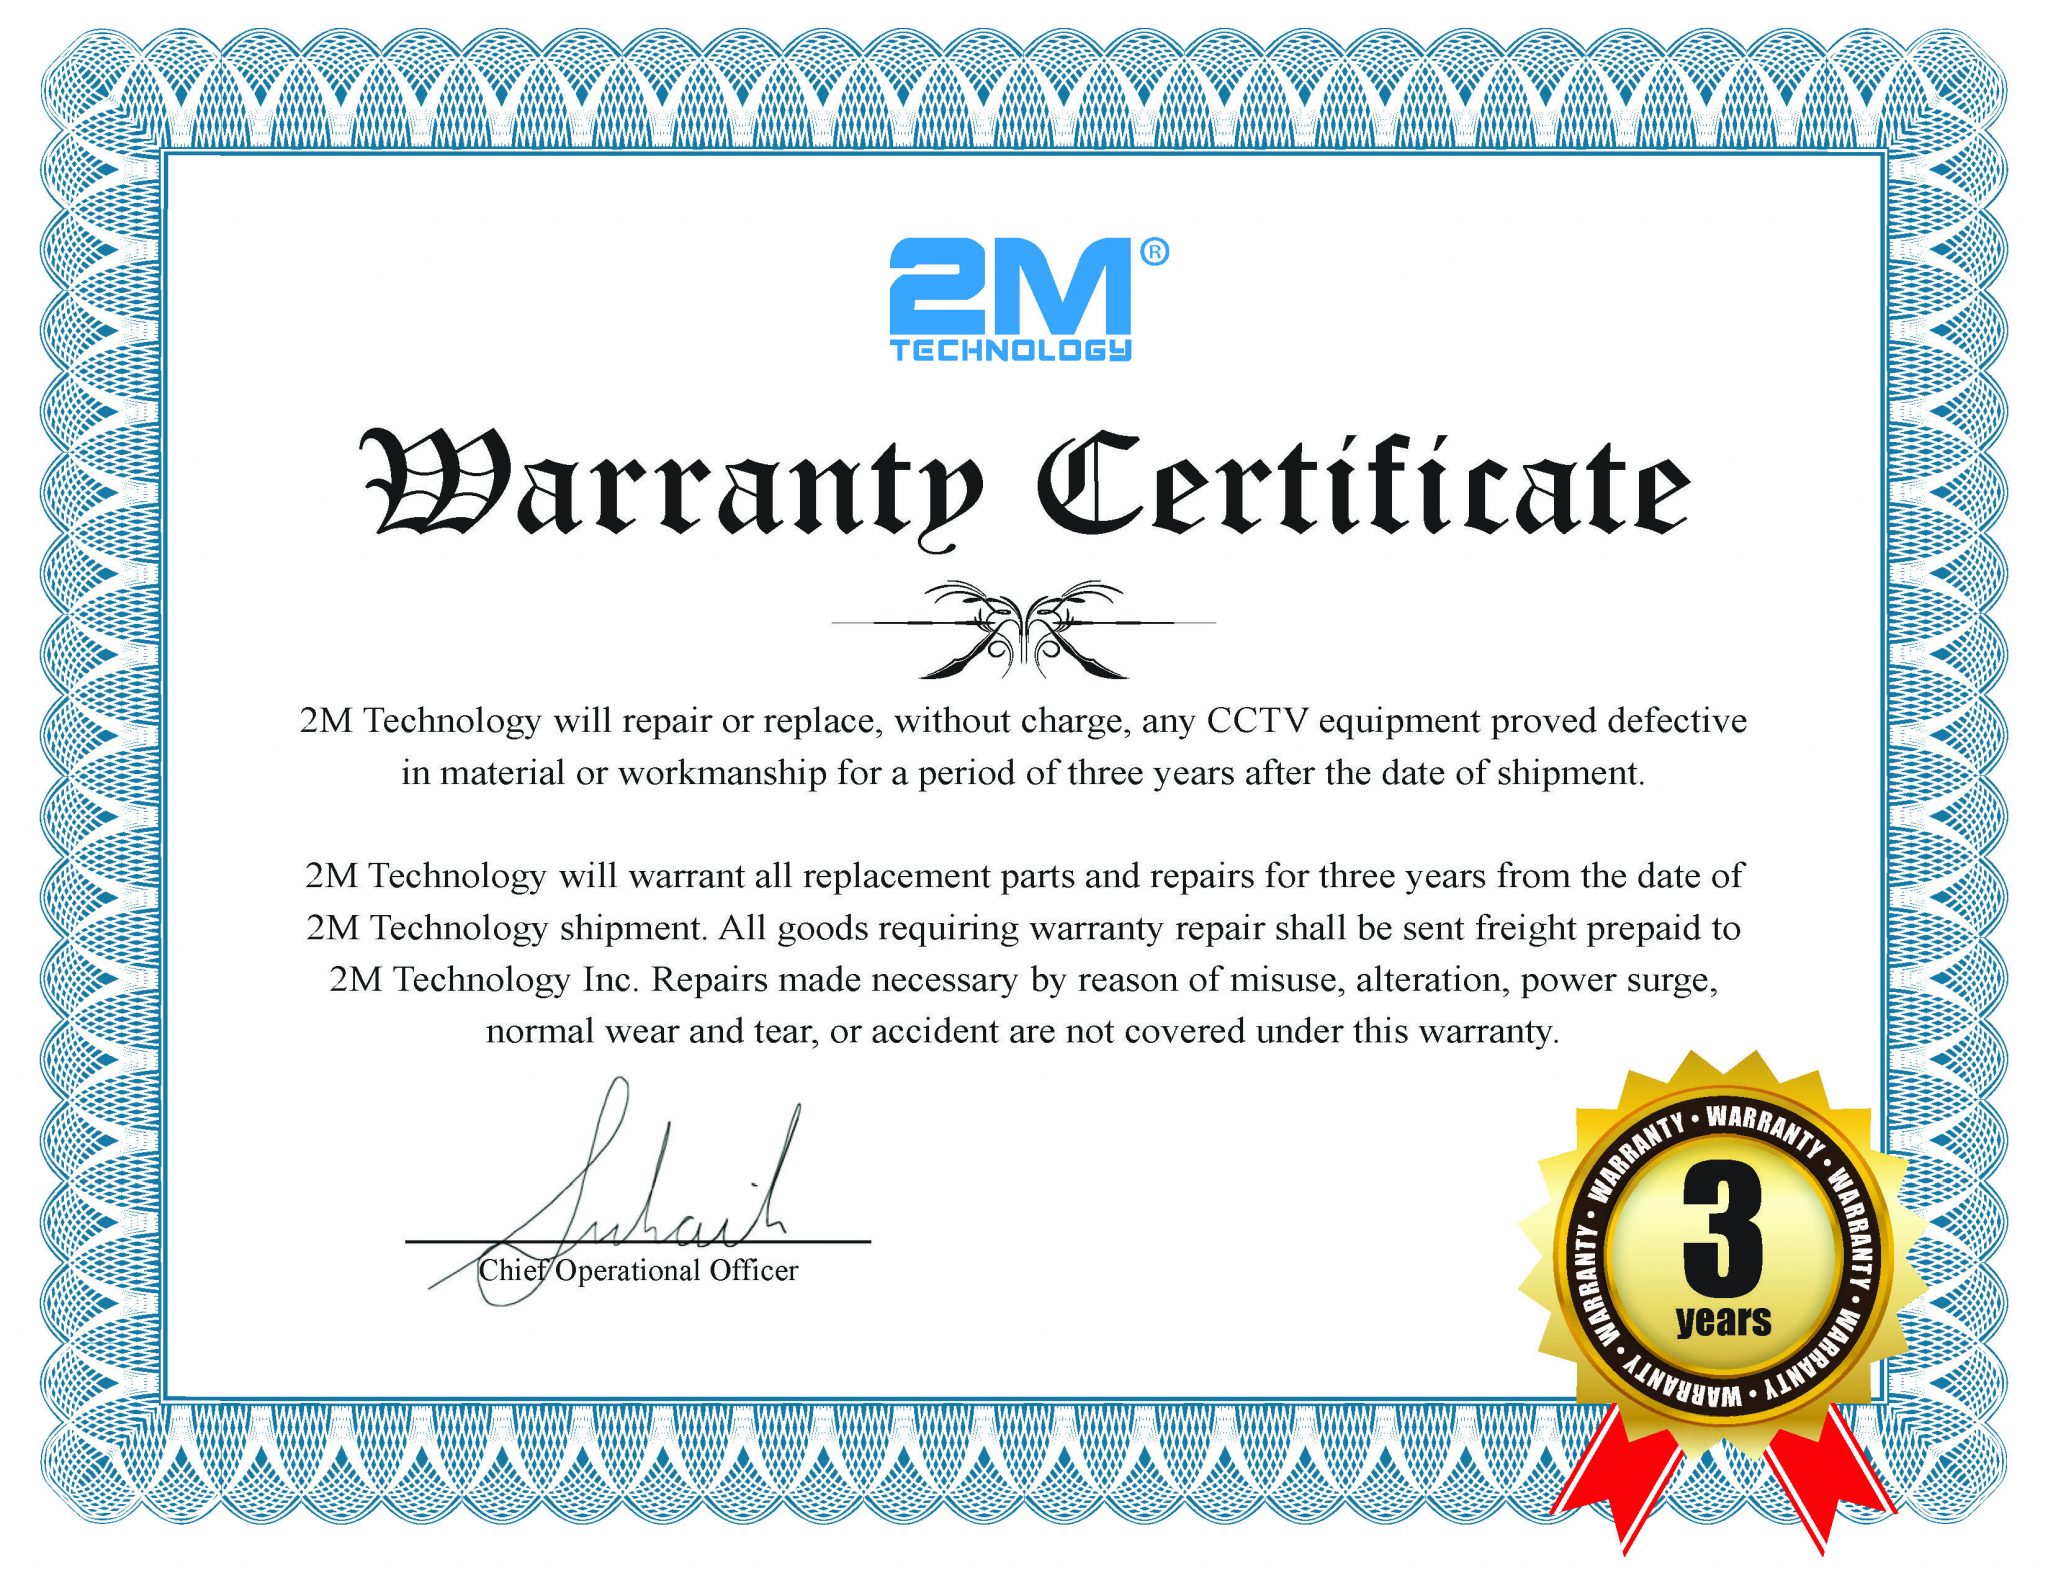 Warranty Certificates Custom Security Solutions 2M TECHNOLOGY INC